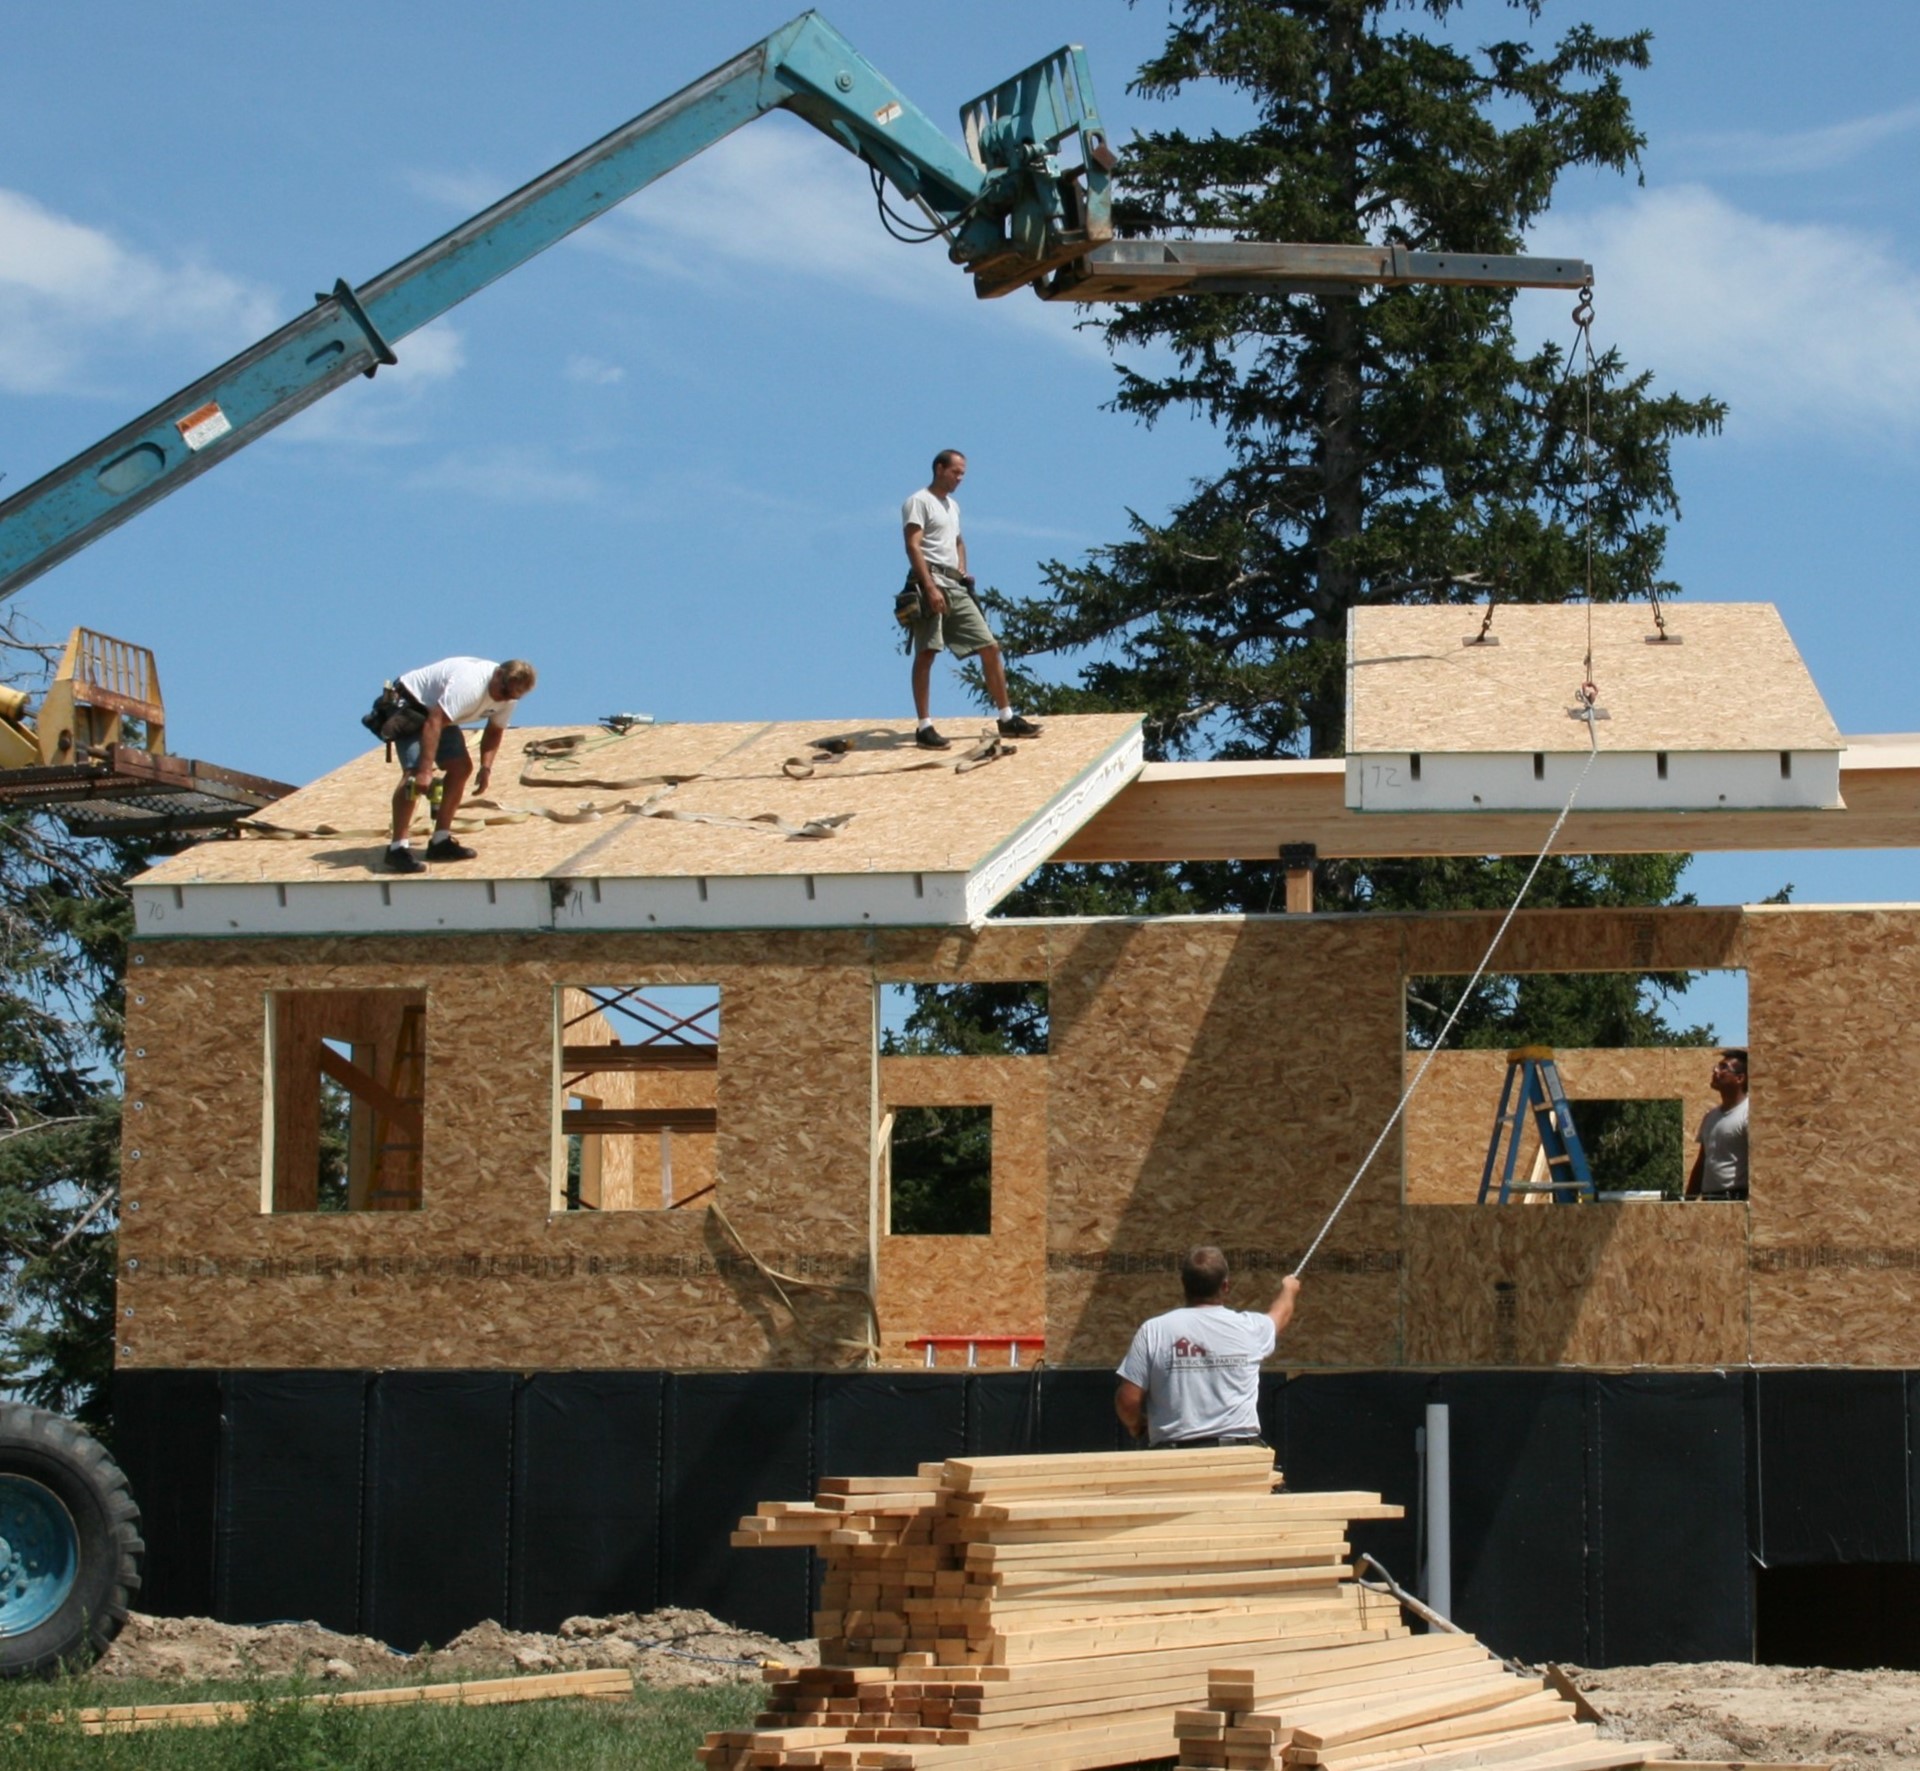 exterior view of home under construction using SIP panels; workers on the ground and on the roof; loader lowers large insulated roof panel into position - photo